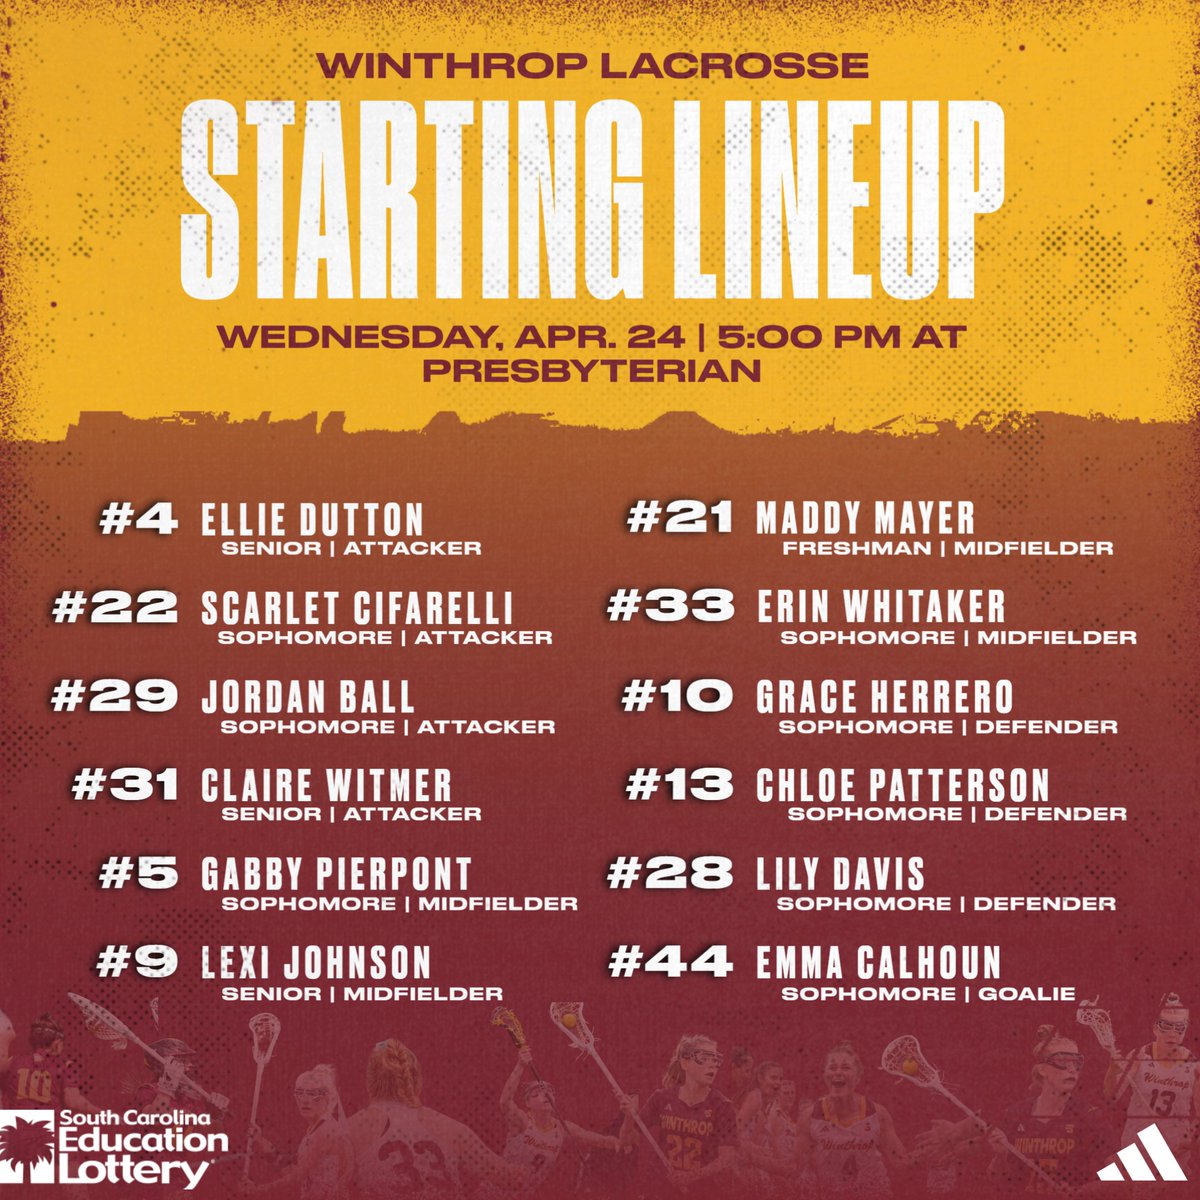 For the final time this season, here is your starting lineup as we get ready to square off with the Blue Hose in Clinton! #ROCKtheHILL | #BigSouthLax